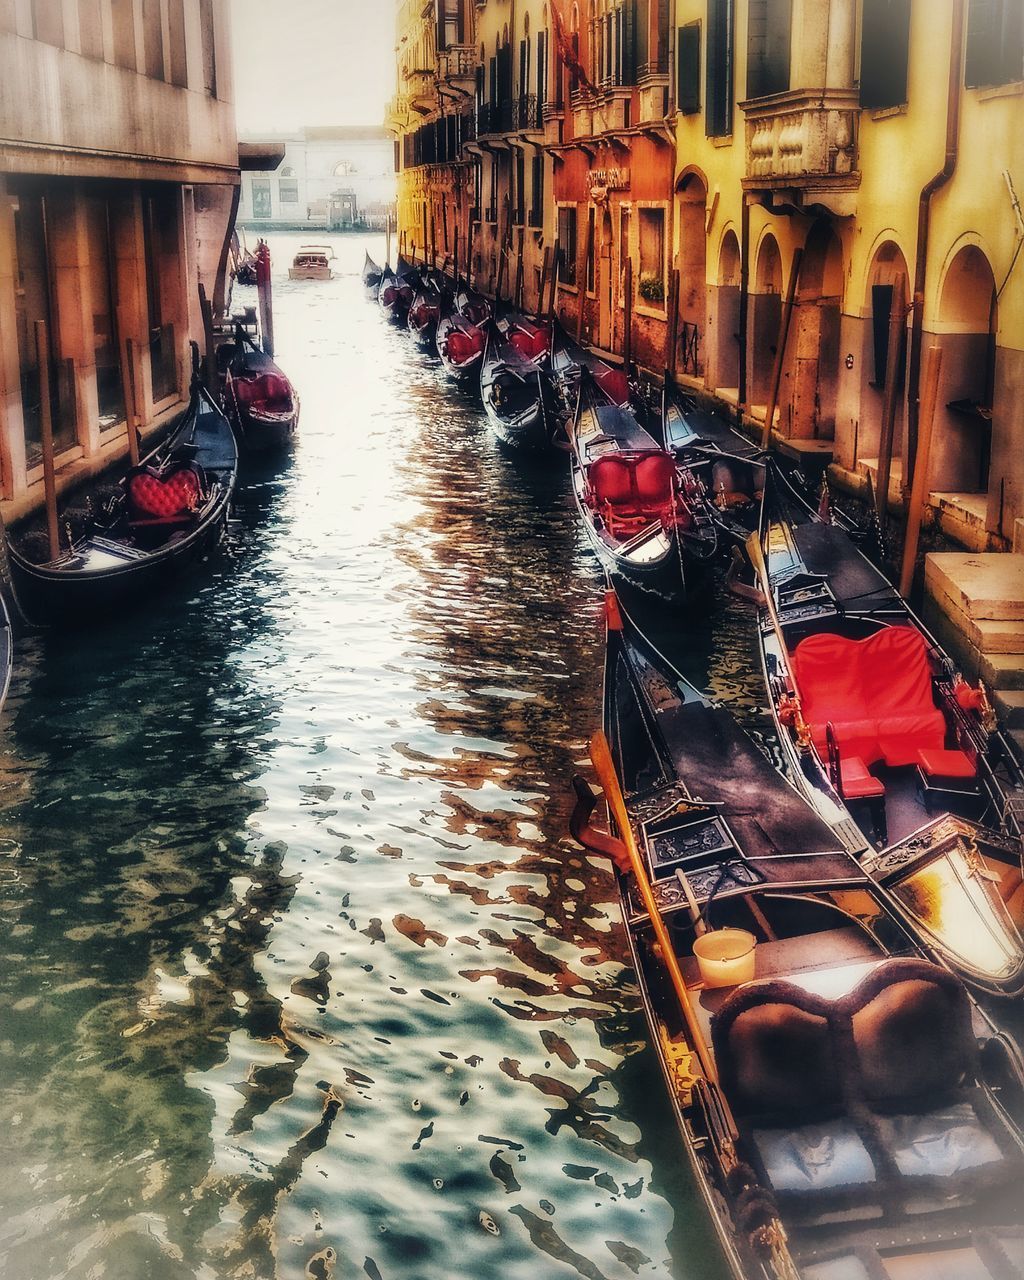 VIEW OF BOATS IN CANAL